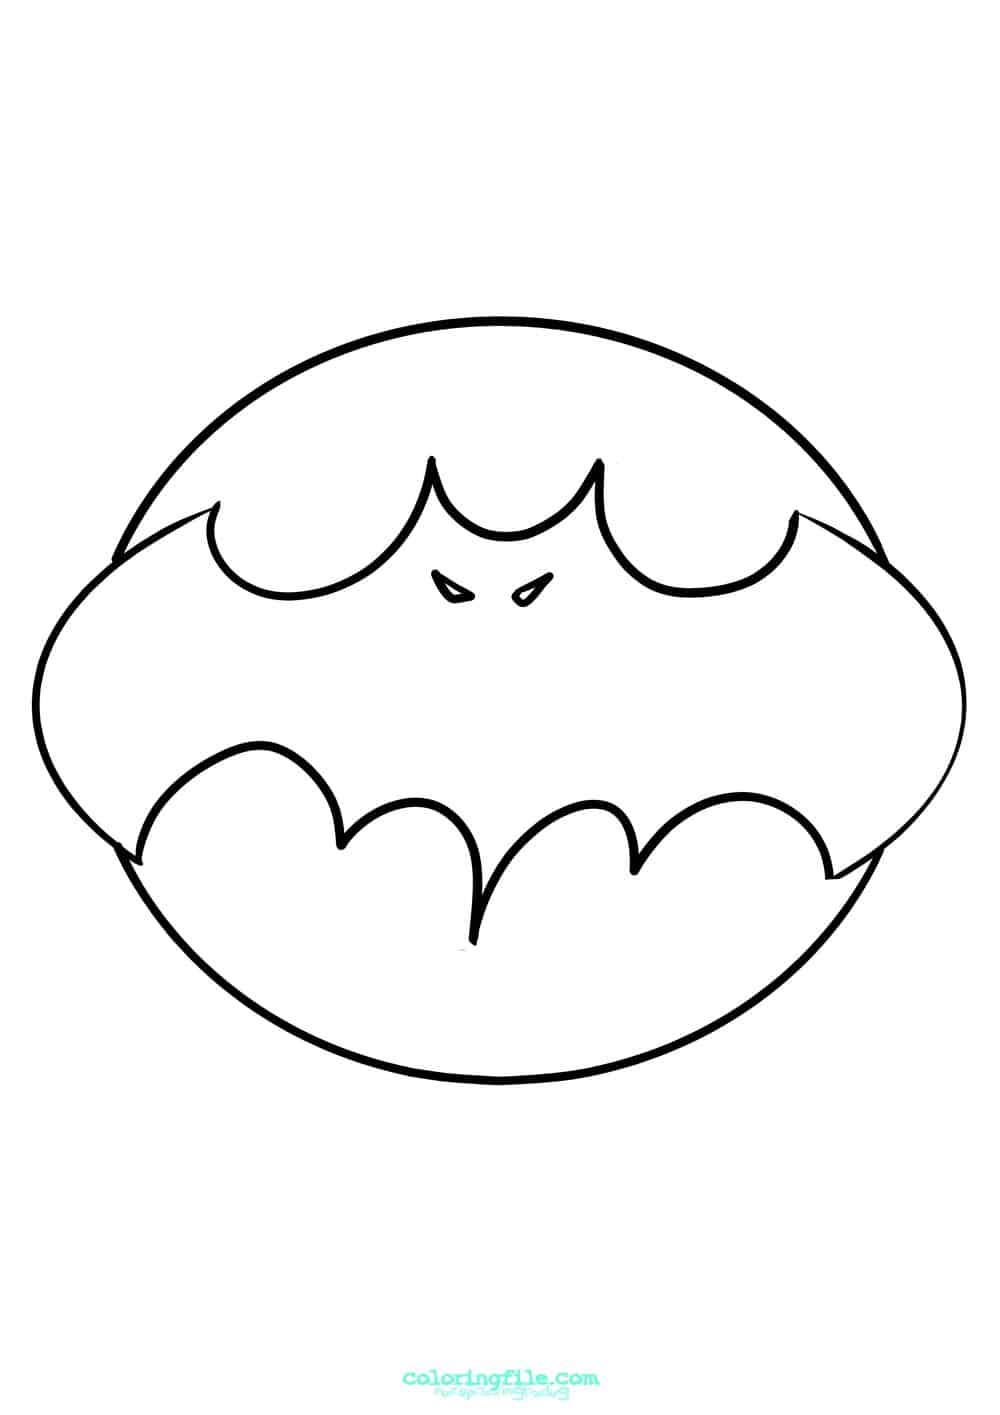 Halloween bat icon coloring pages